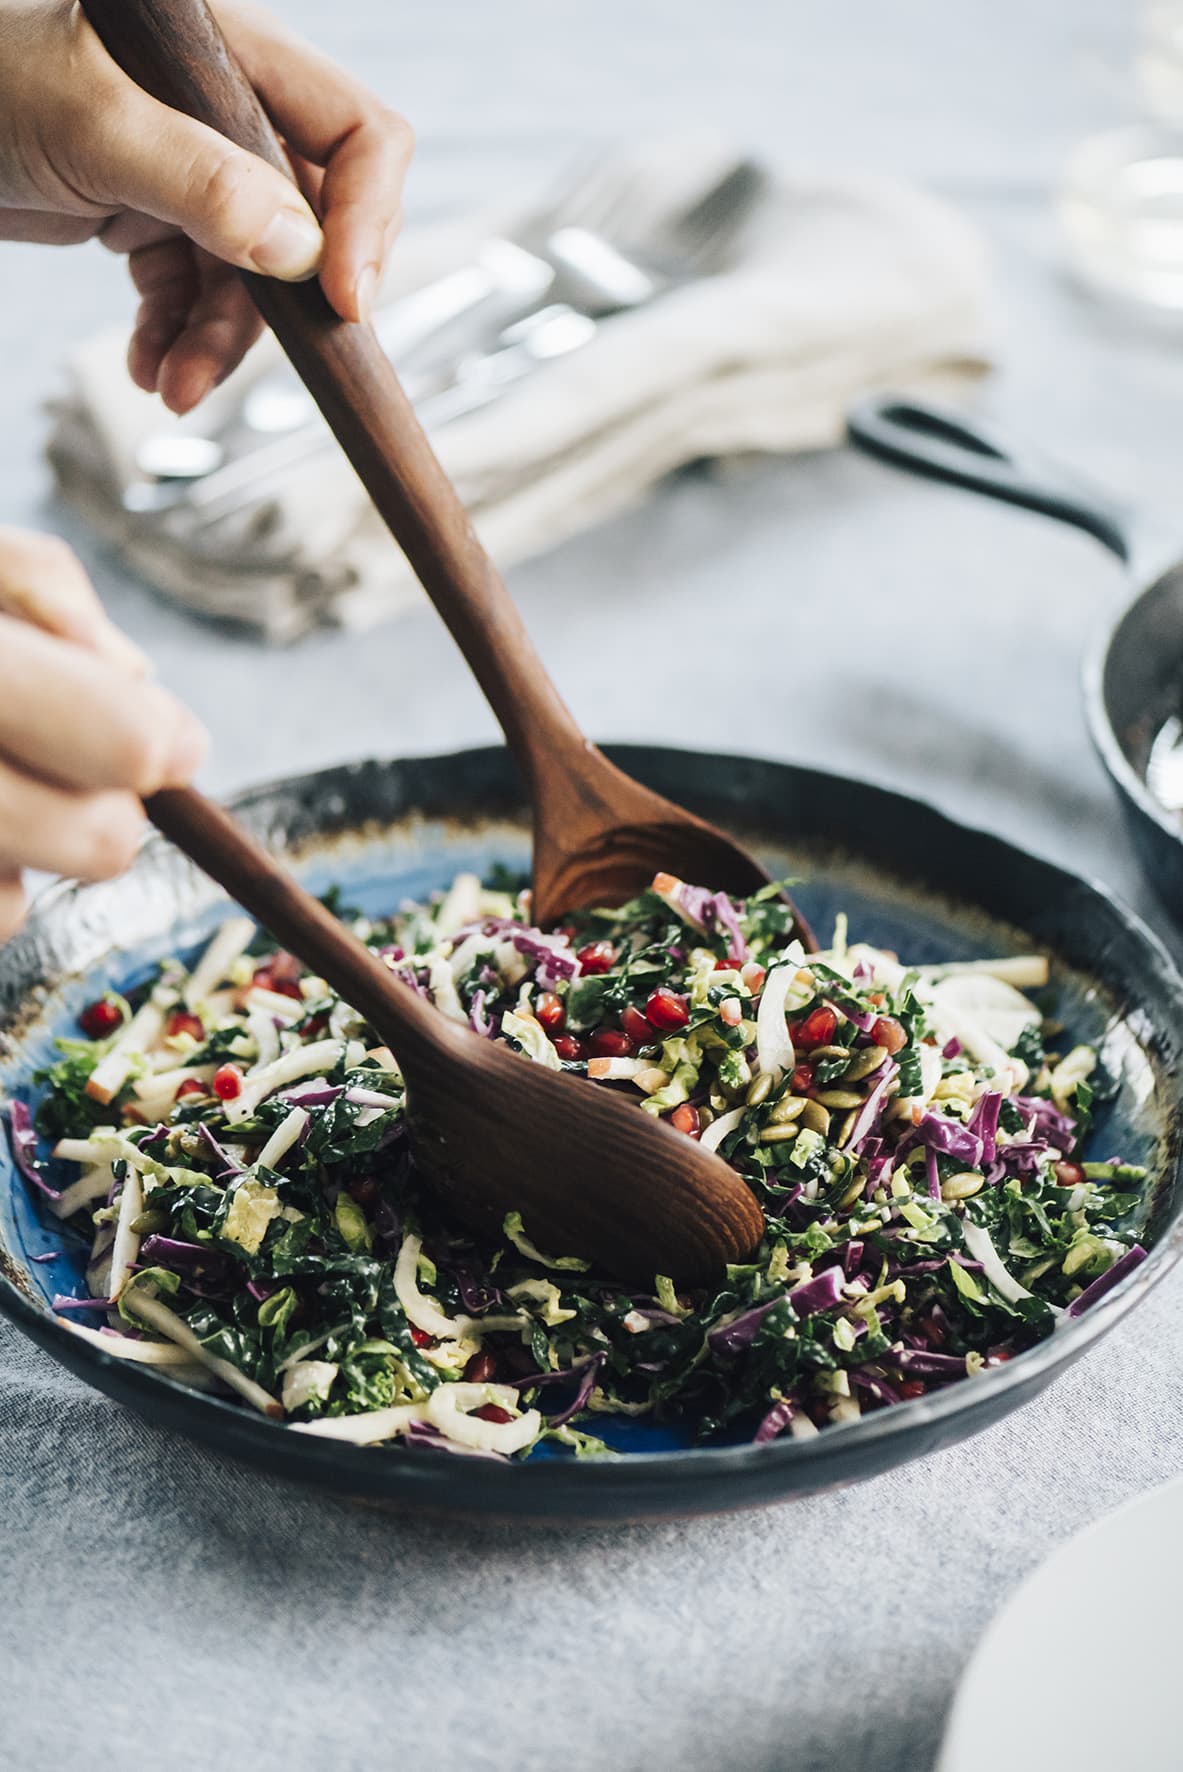 A woman's hands tossing kale pomegranate salad in a blue ceramic bowl.